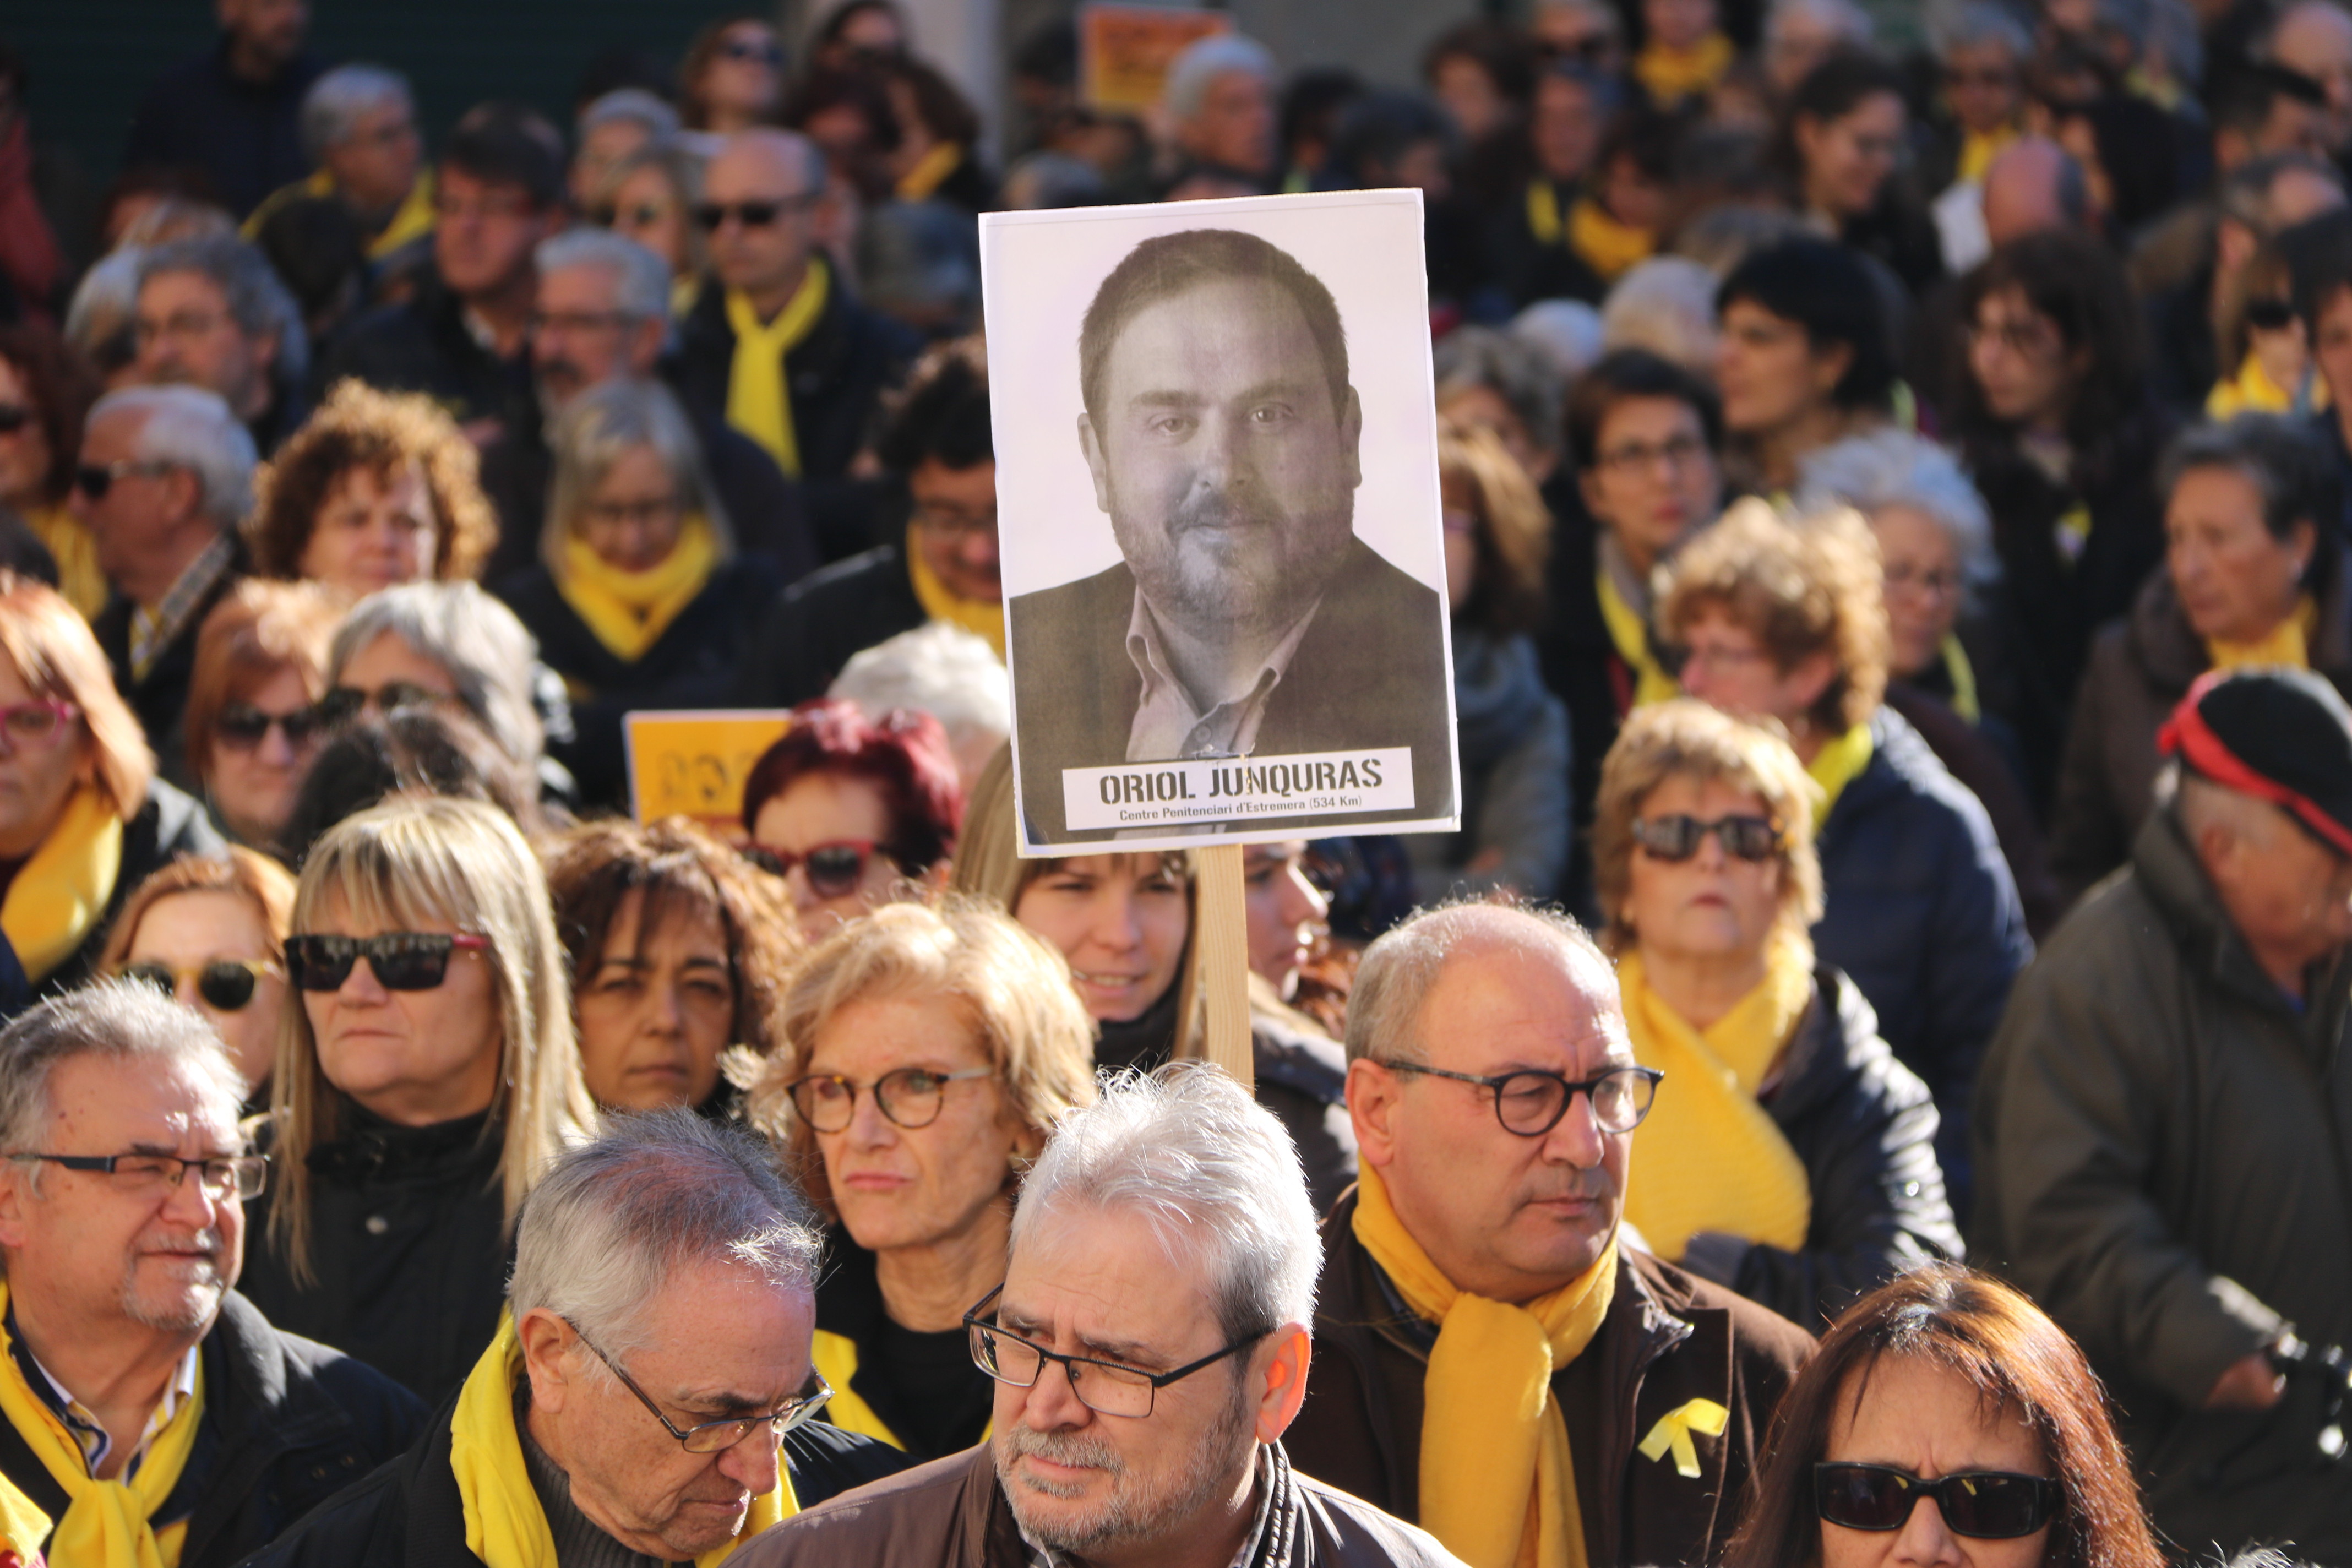 Protest held in December 2017 calling for the release of Jailed Catalan leaders (by ACN)